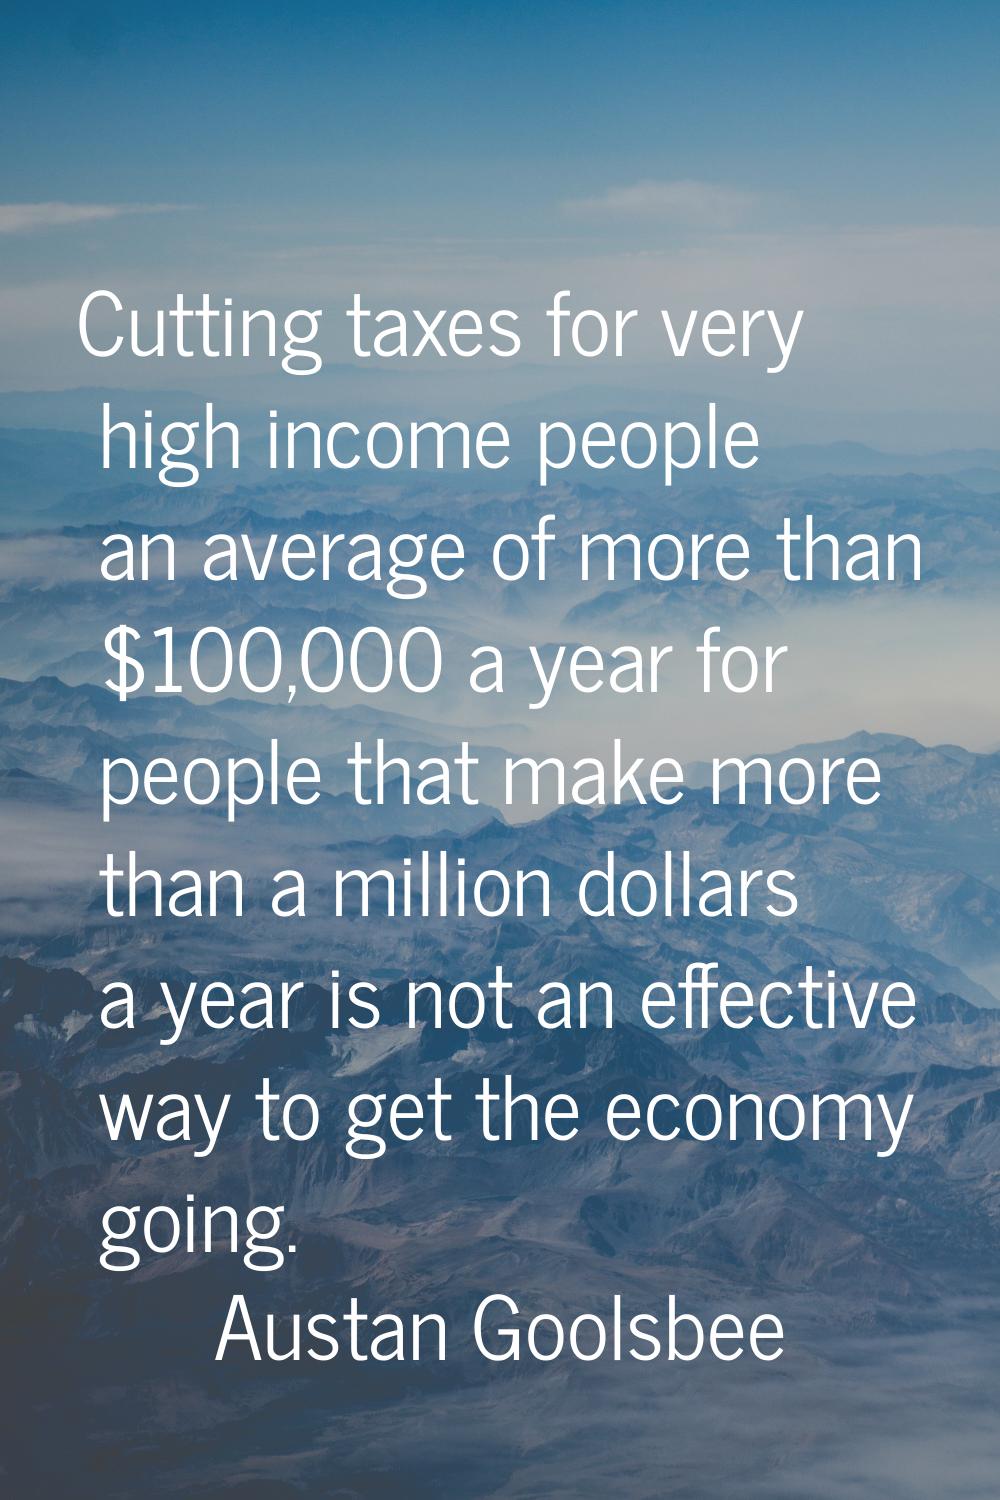 Cutting taxes for very high income people an average of more than $100,000 a year for people that m